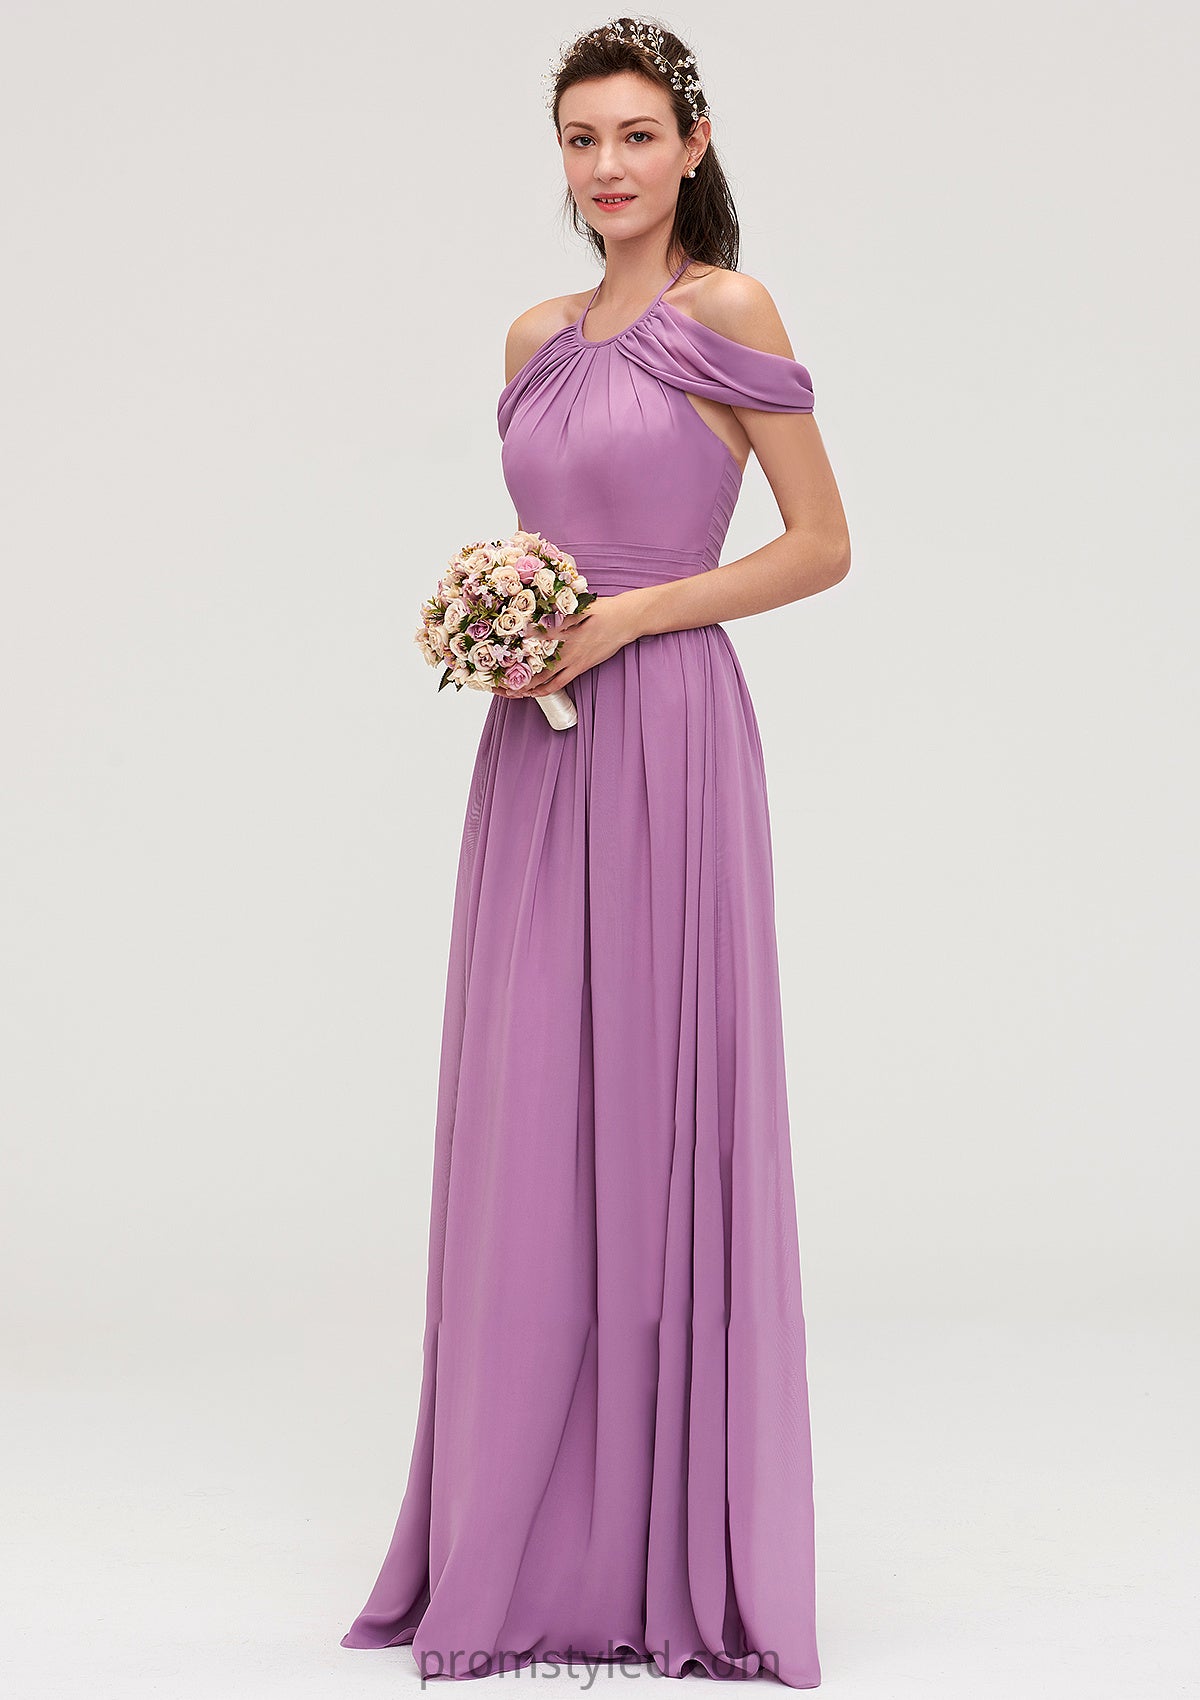 Scoop Neck Sleeveless Chiffon A-line/Princess Long/Floor-Length Bridesmaid Dresseses With Pleated Katherine HLP0025461